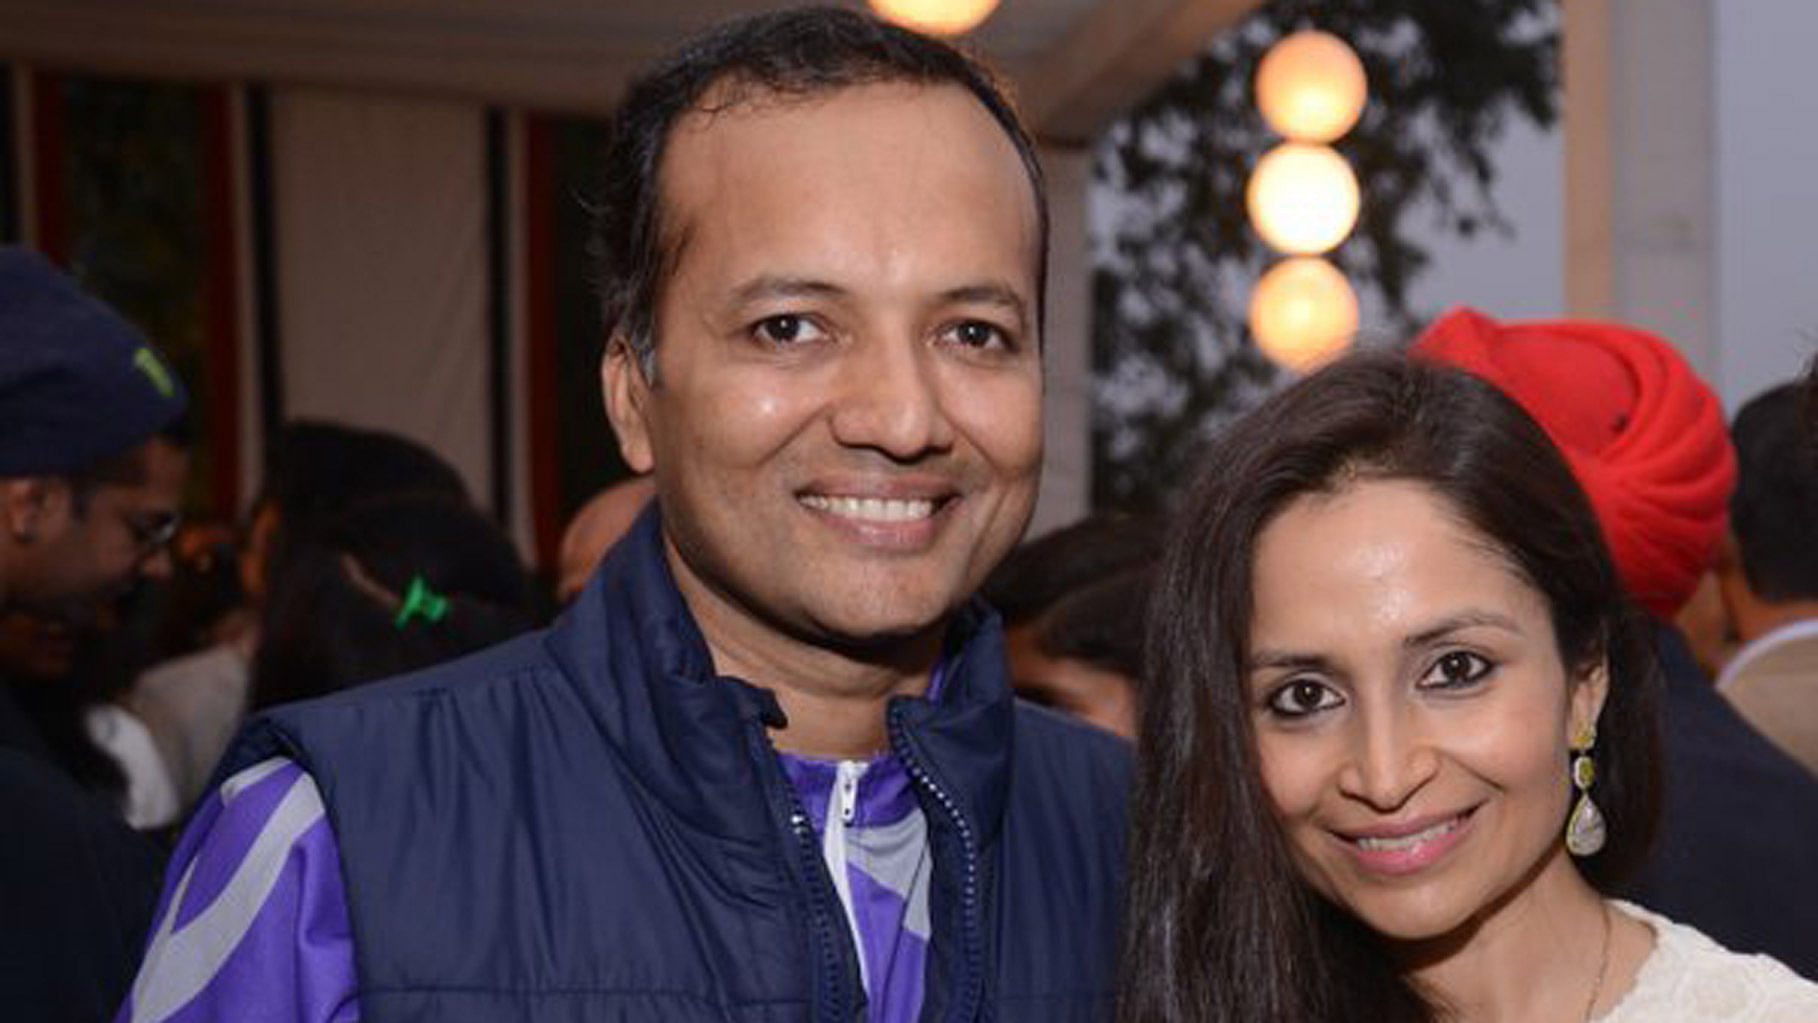 

Naveen Jindal with his wife Shallu, Oswal’s daughter. (Photo: <a href="https://twitter.com/APOLOLIFE/status/671281476718174208">Twitter</a>)